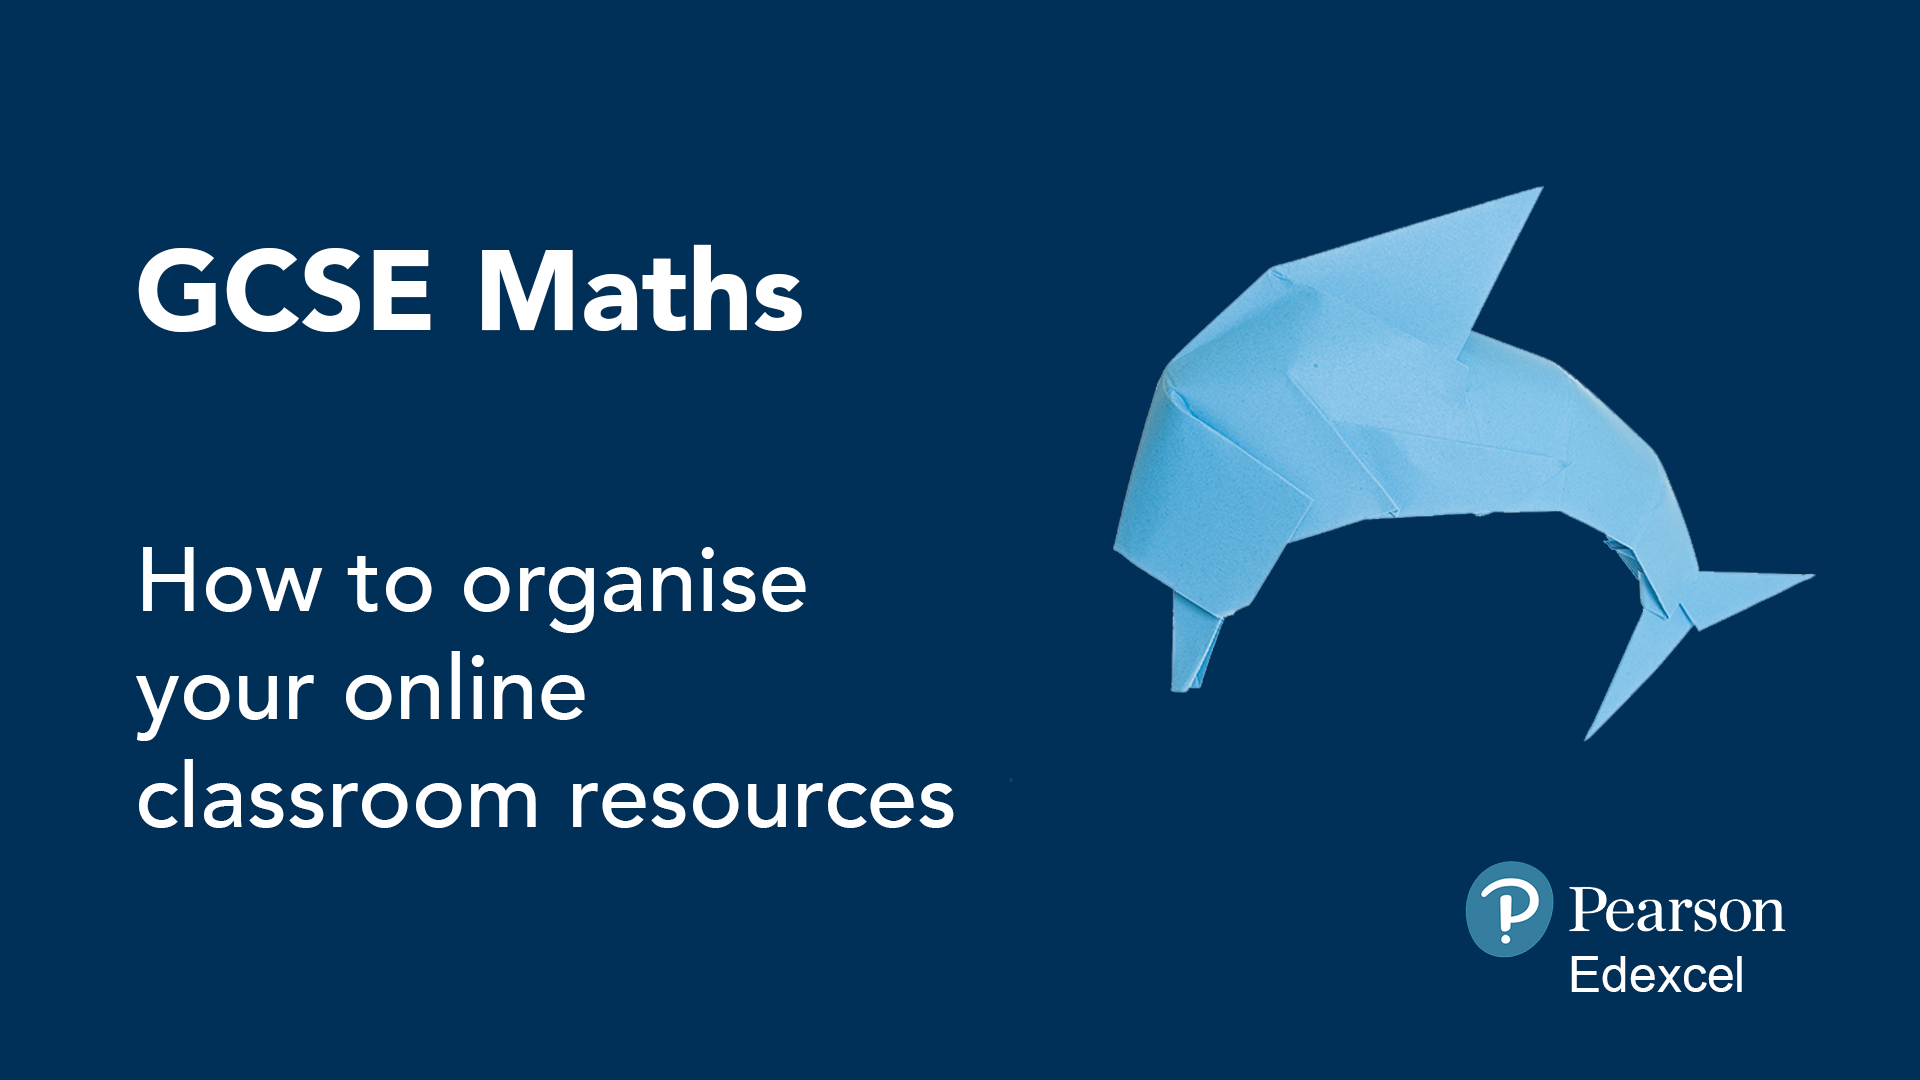 GCSE Maths: How to organise your online classroom resources